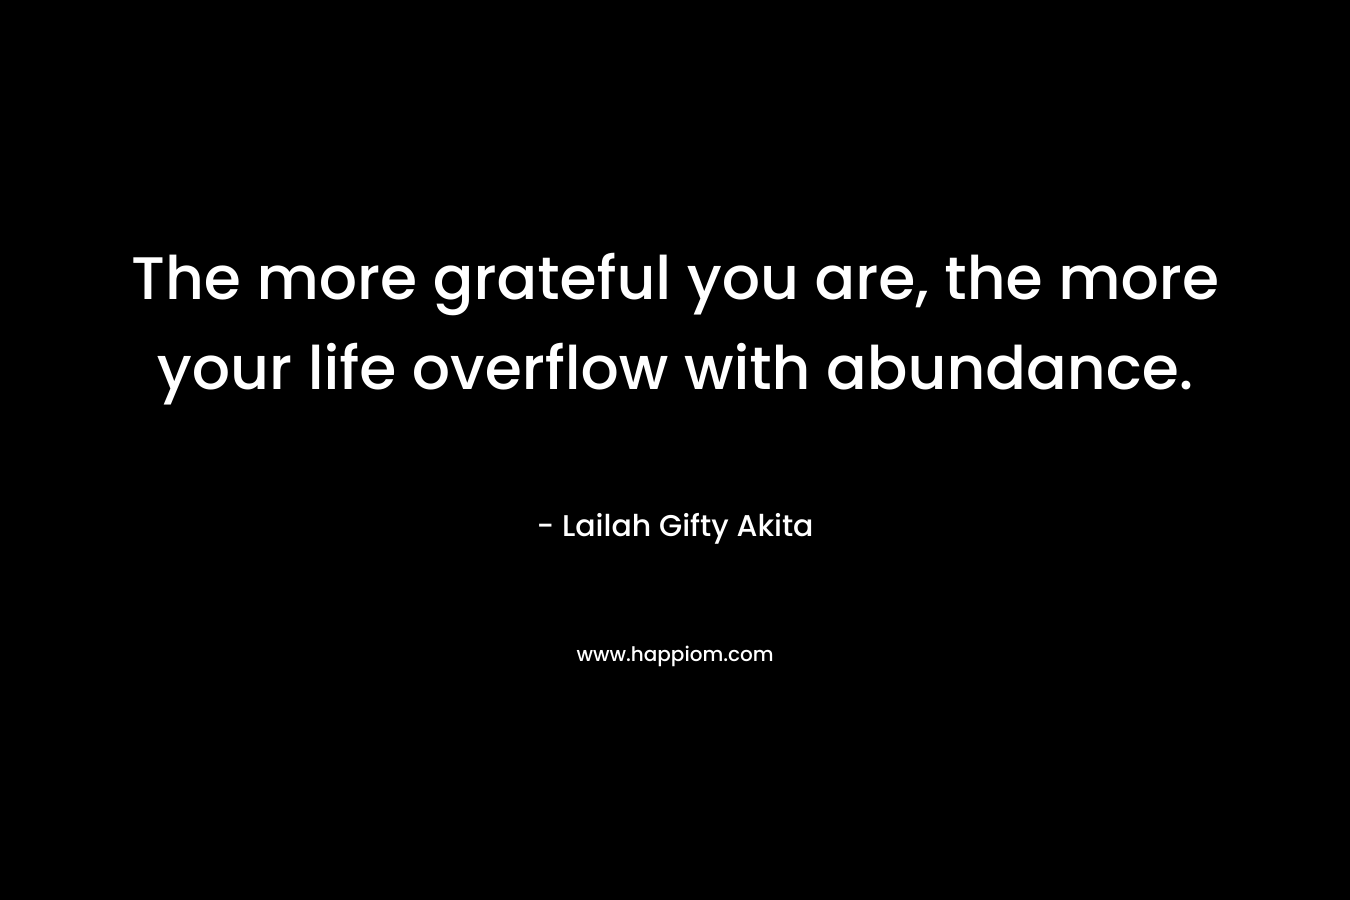 The more grateful you are, the more your life overflow with abundance. – Lailah Gifty Akita